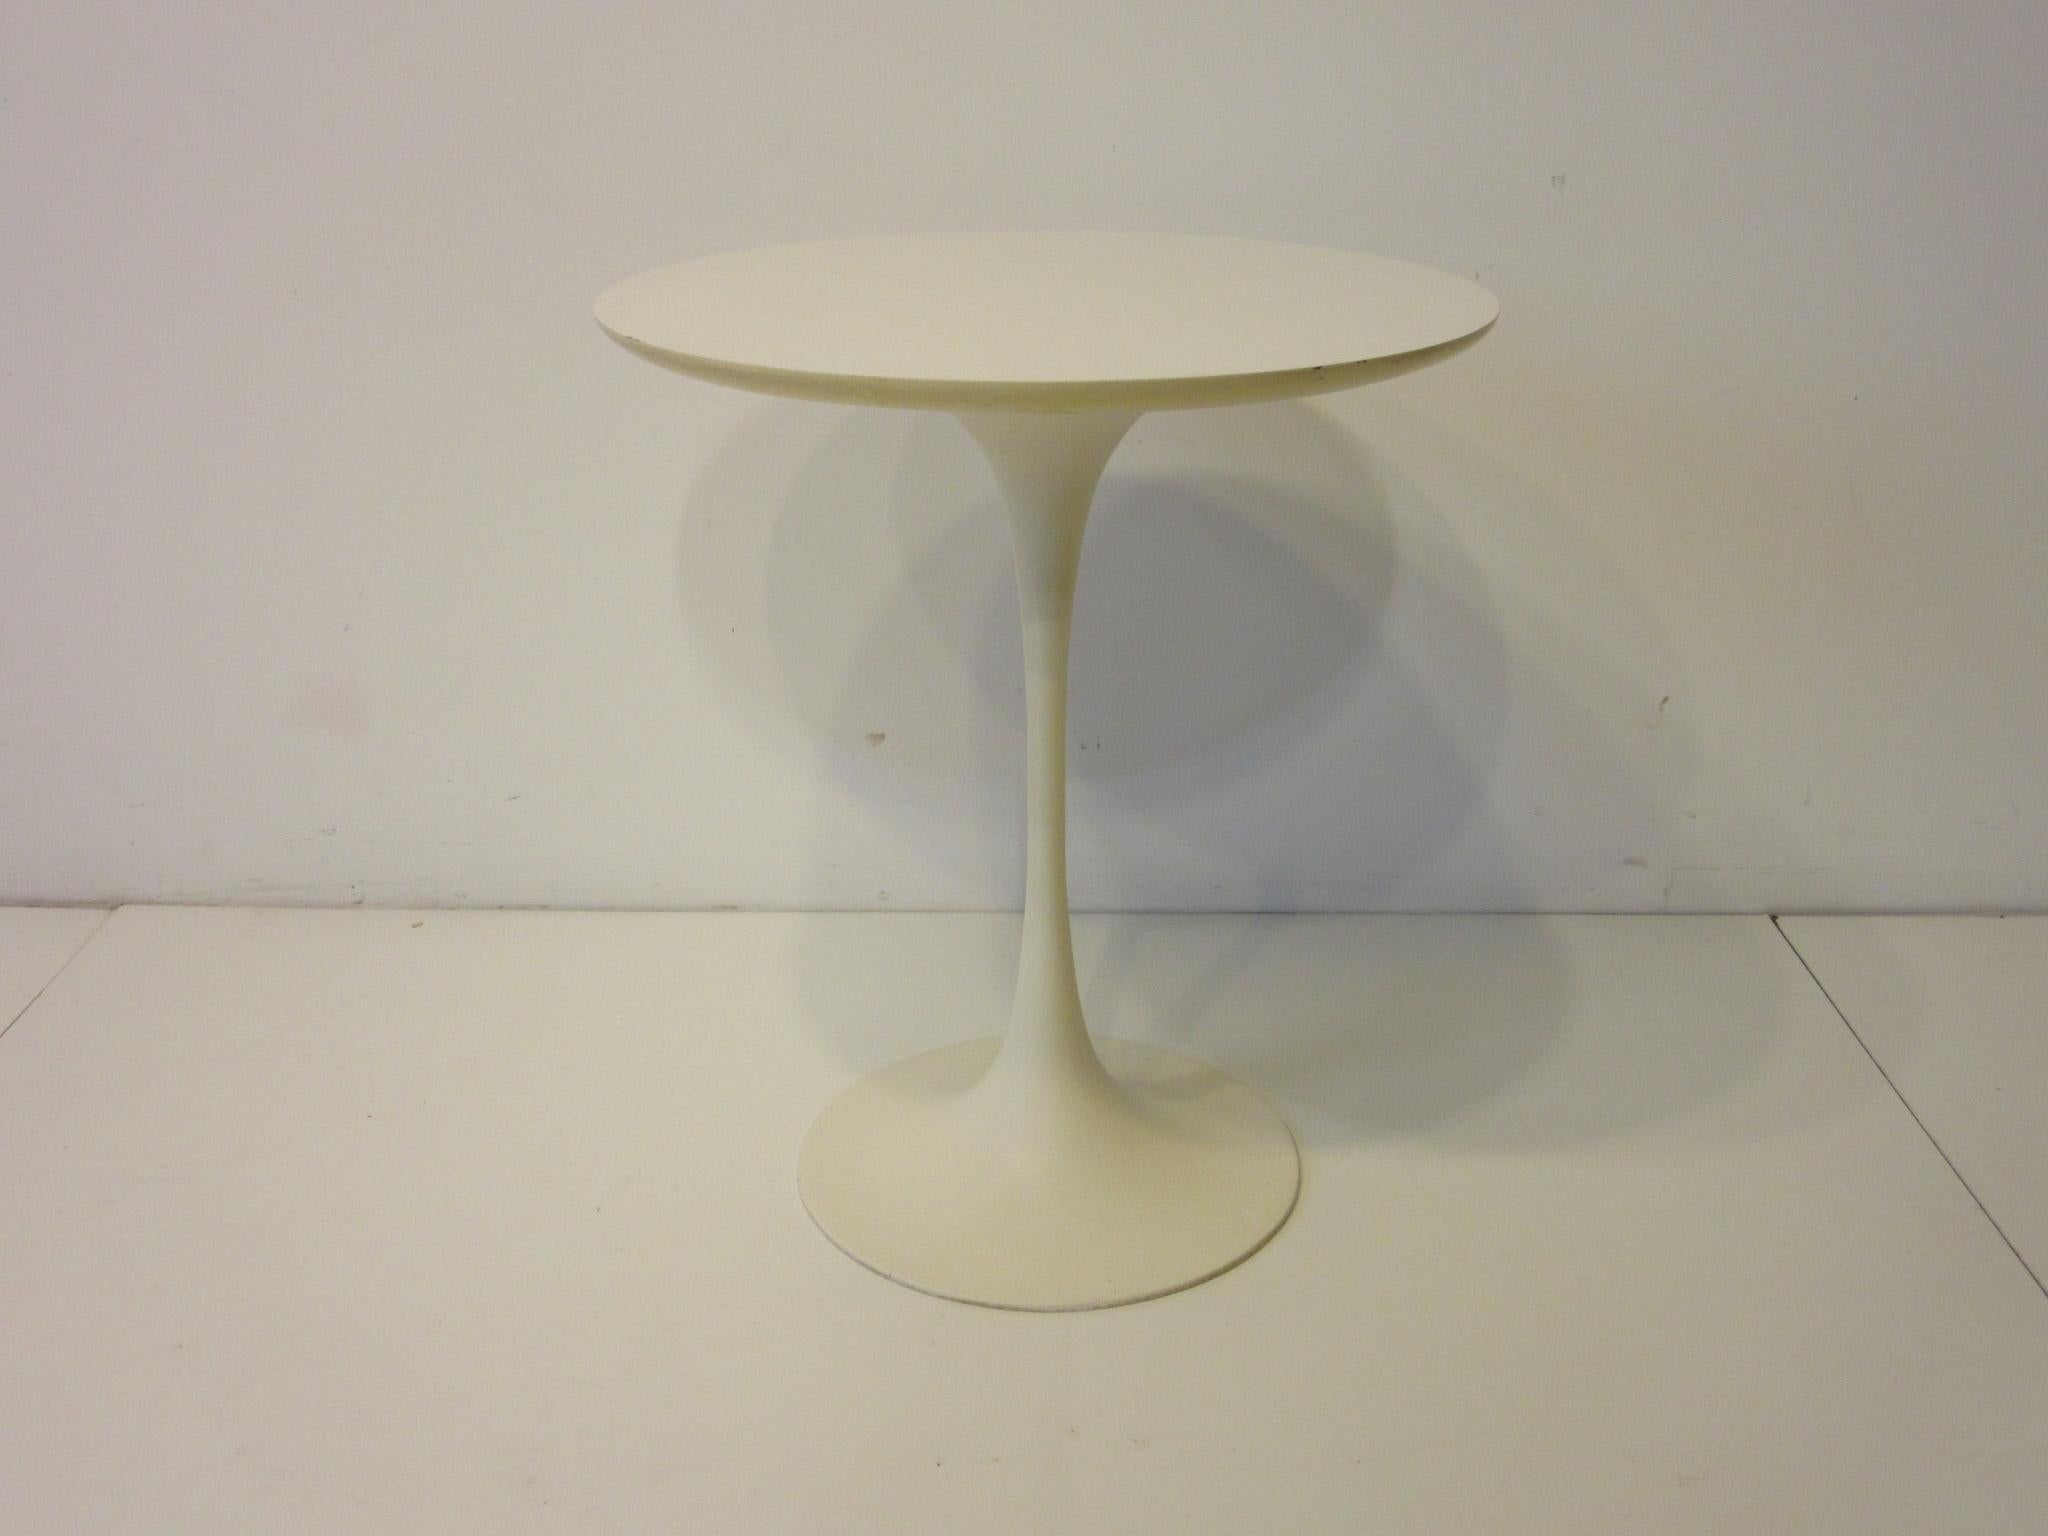 A tulip based pedestal side table with a satin white cast metal base and matching round laminate top designed in the manner of Eero Saarinen and Knoll, manufactured by the Burke Furniture Company.